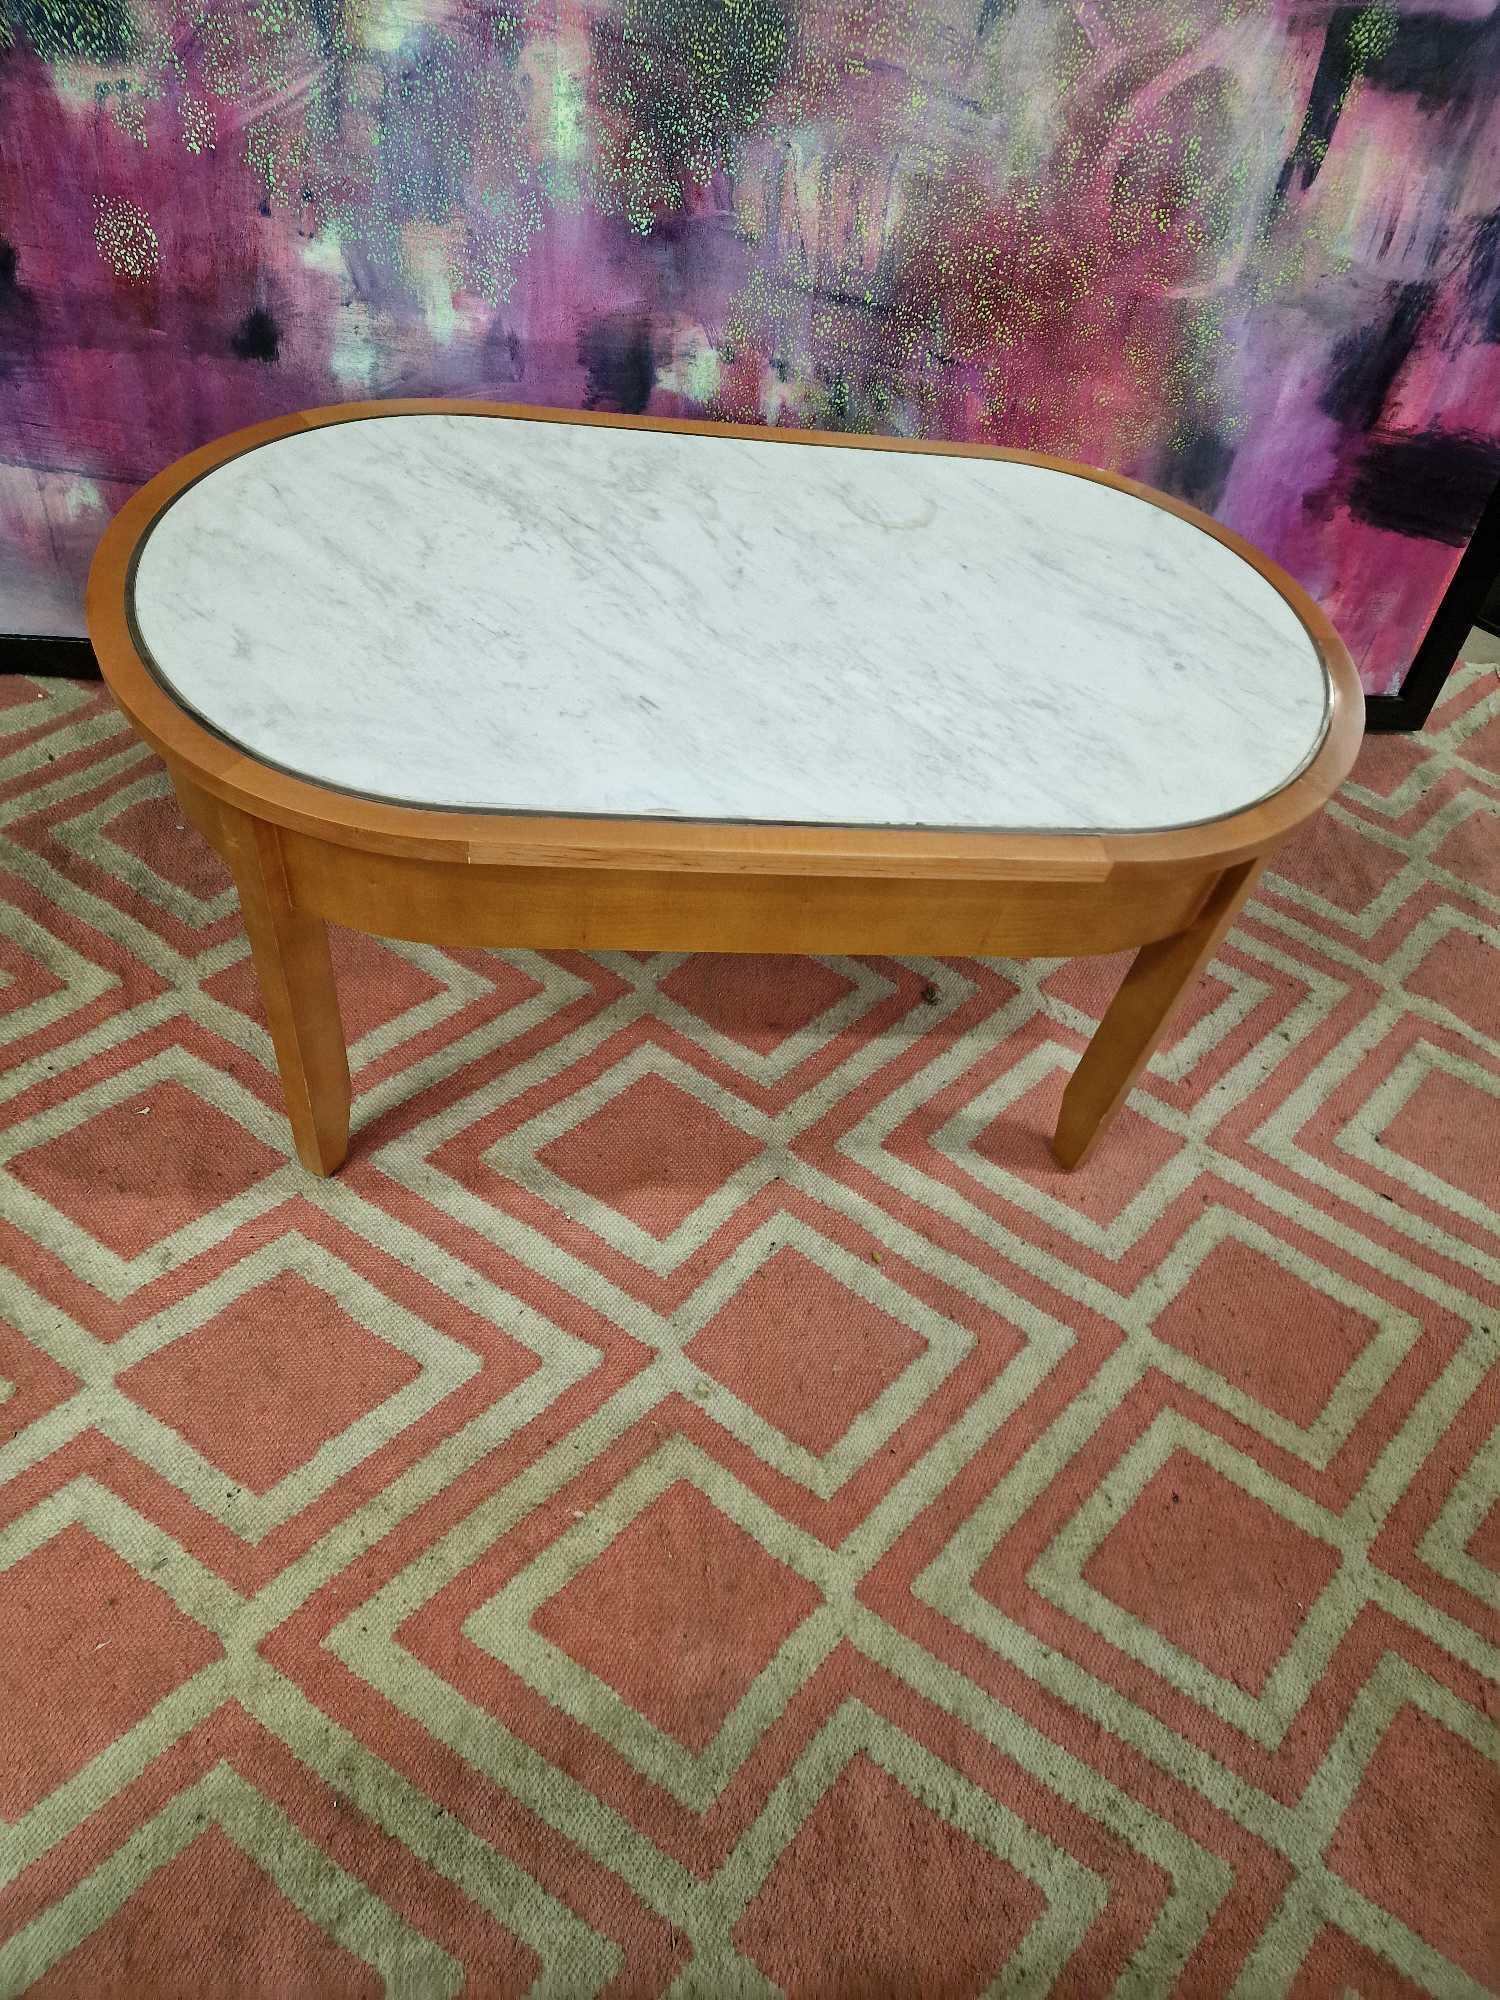 Coffee table oak oval table with a white marble top inset enhanced by silver metal trim 100 x 55 x